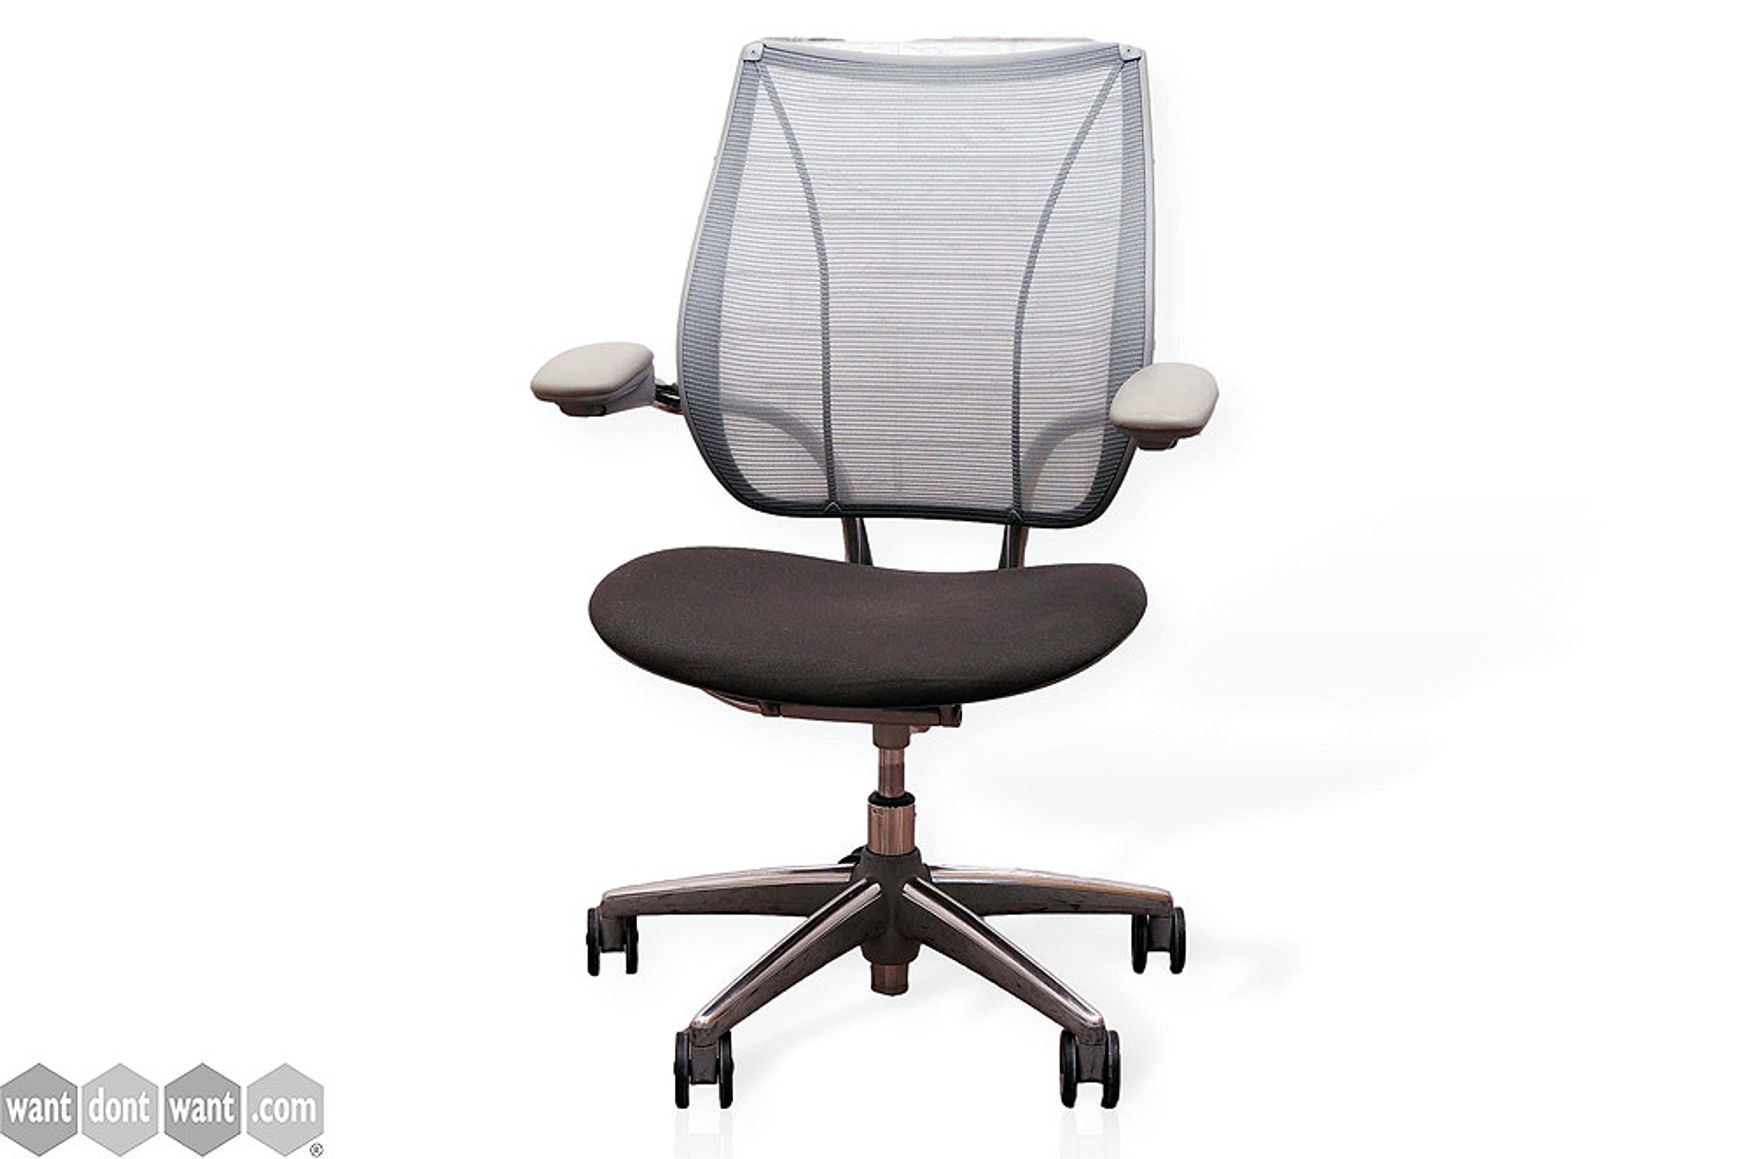 Used Humanscale Executive 'Liberty' Task Chair in grey.